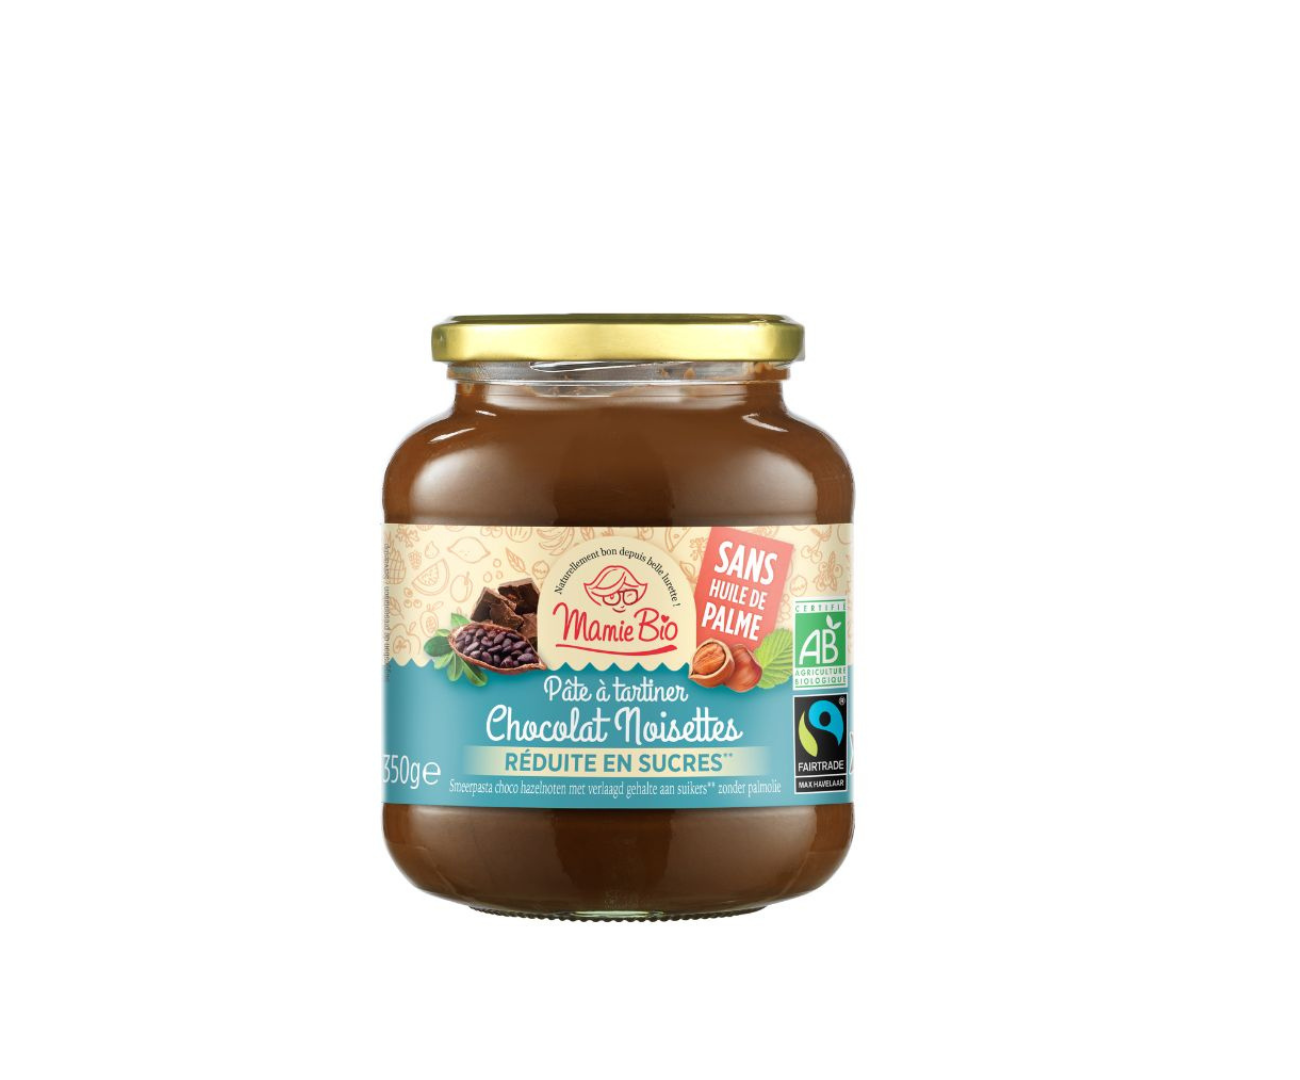 Pate a tartiner choco noisettes reduite sucre 350g